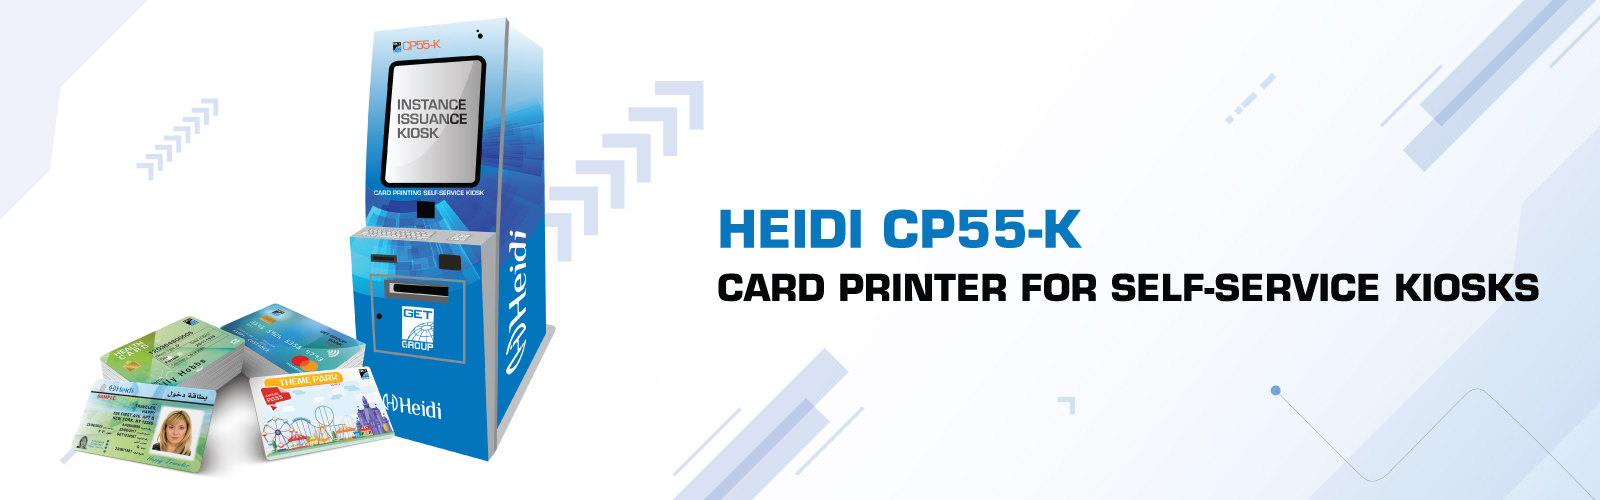 The Heidi CP55 printer line by GET group